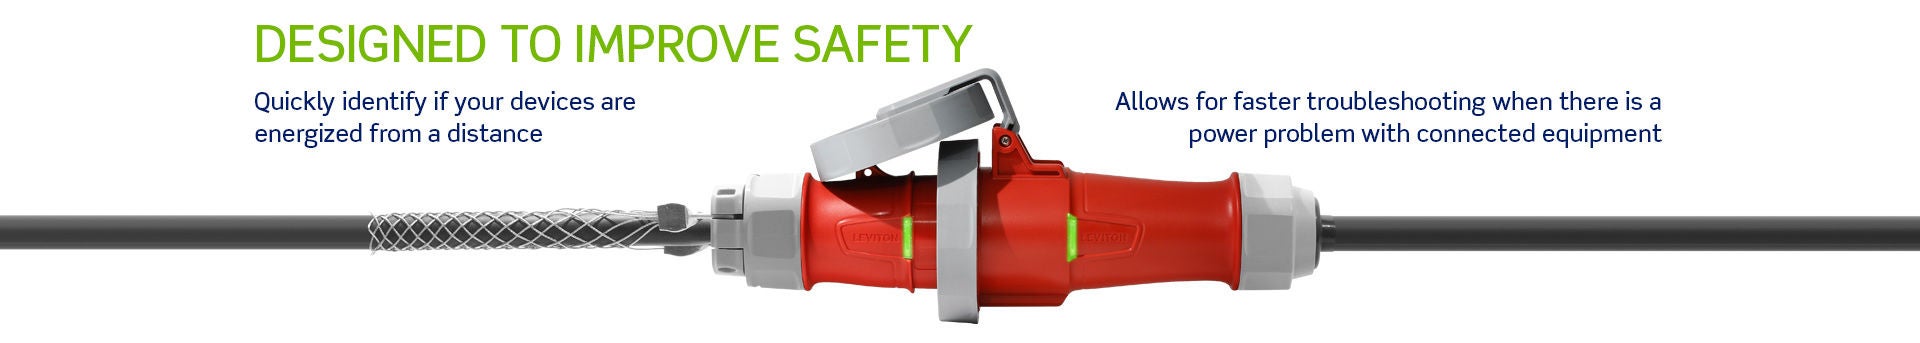 Designed to improve safety. Quickly identify if your devices are energized from a distance. Allows for faster troubleshooting when there is a power problem with connected equipment